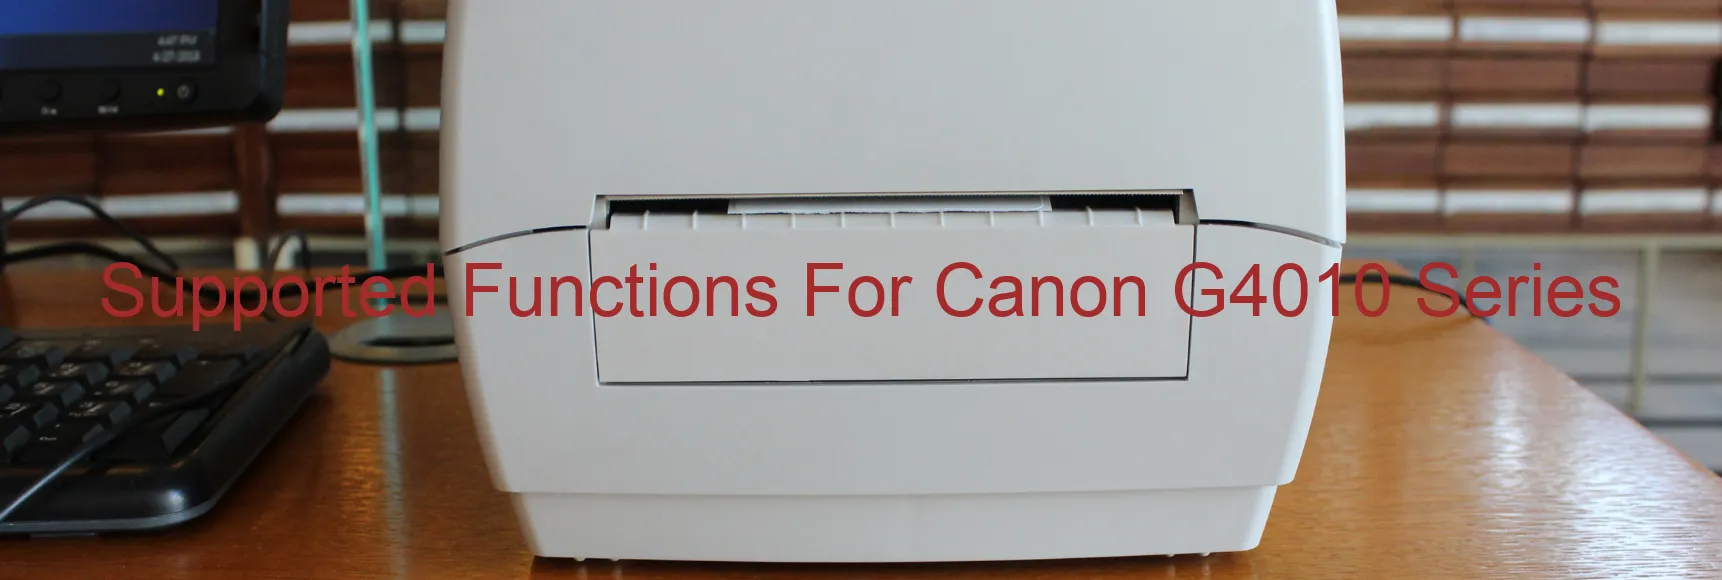 supported-functions-for-canon-g4010-series.webp